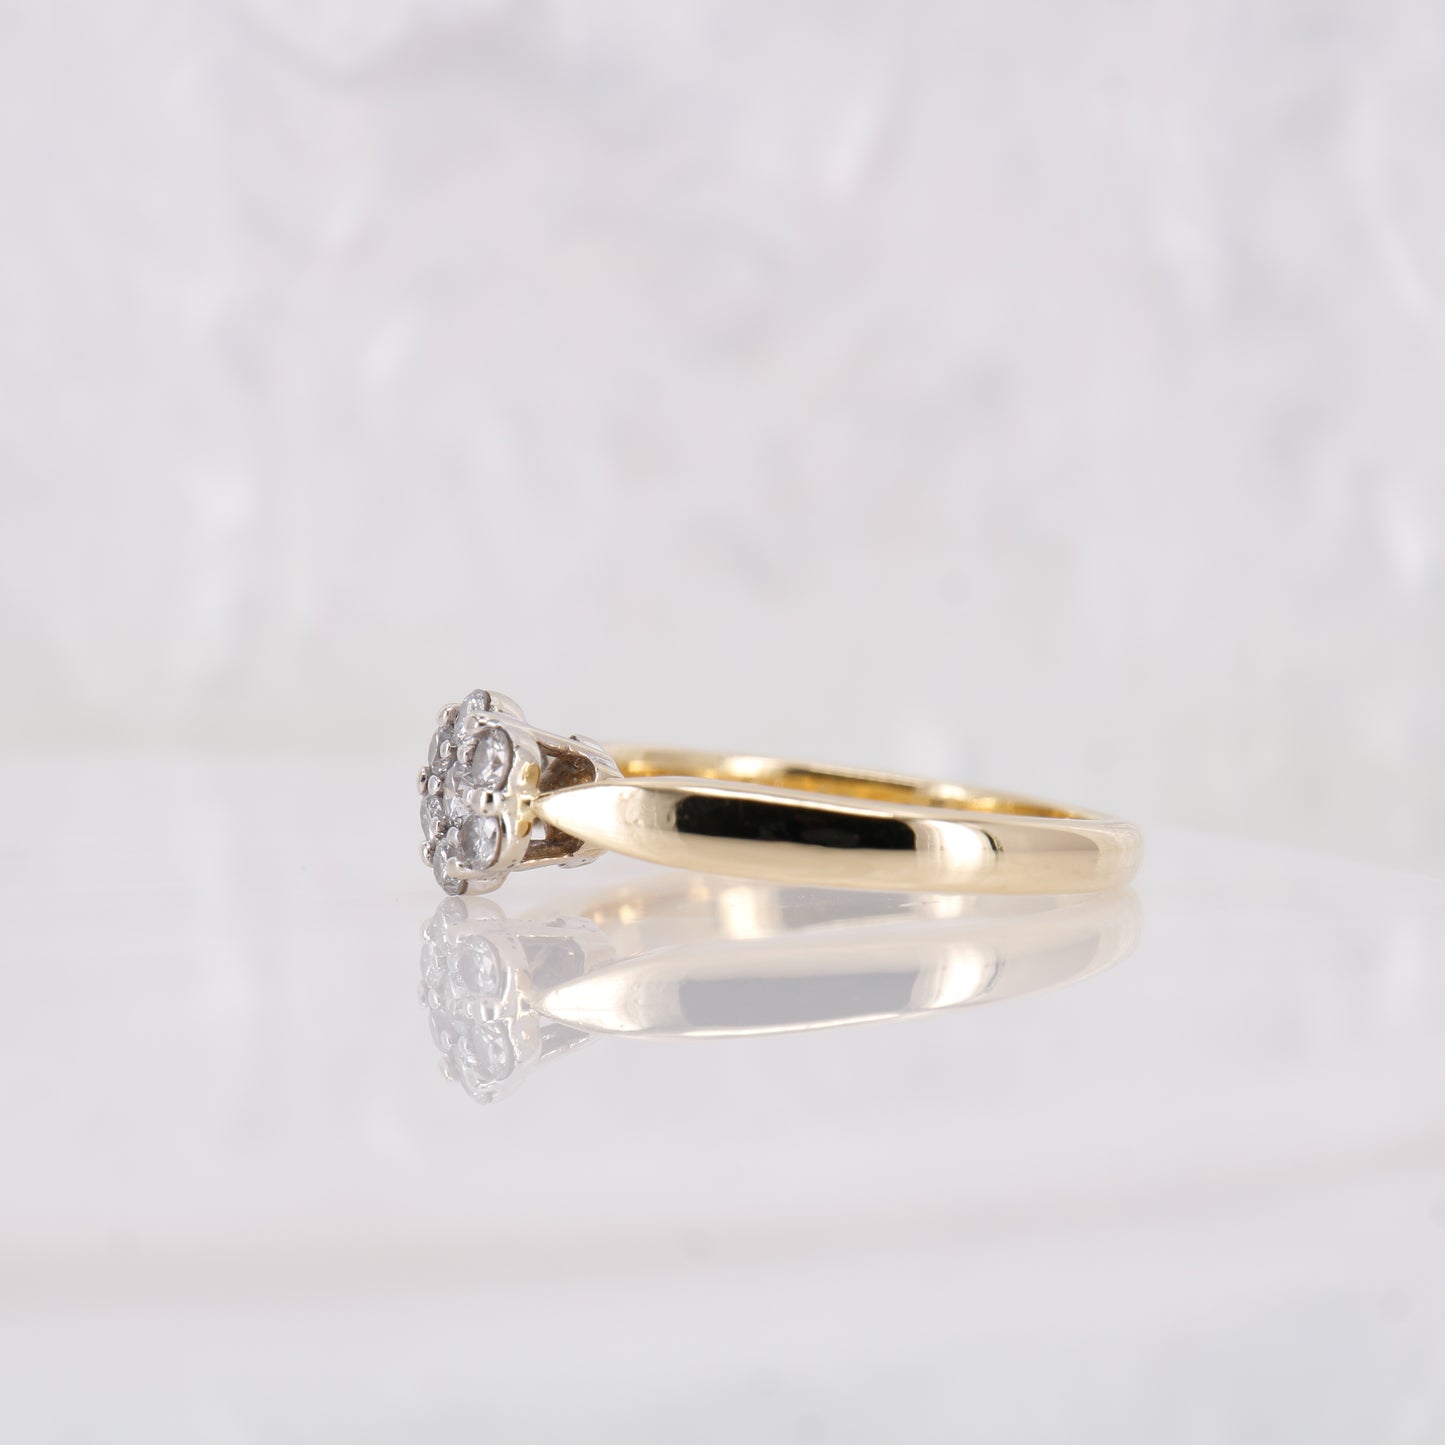 Vintage Secondhand Diasy Diamond Ring. Preowned diamond flower ring in 18ct yellow gold.